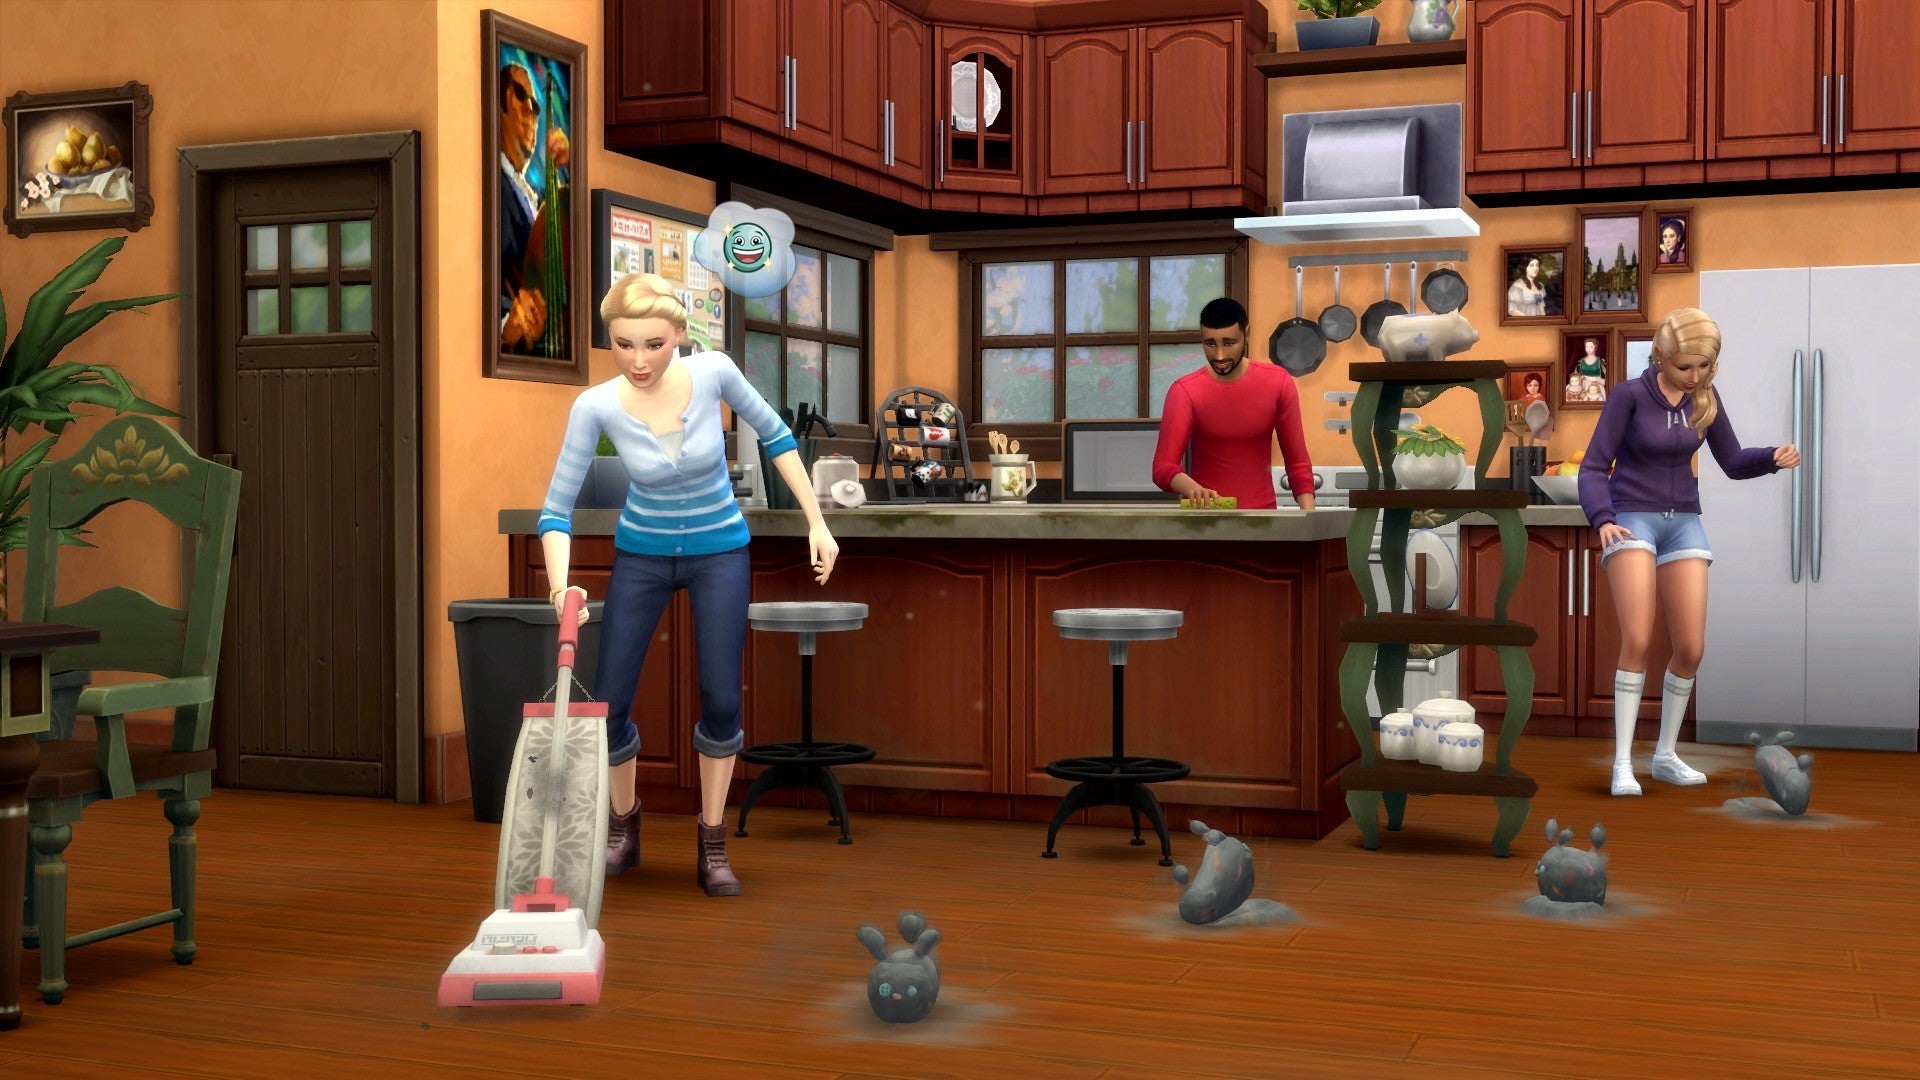 A Sim vacuuming up dust bunnies in The Sims 4.